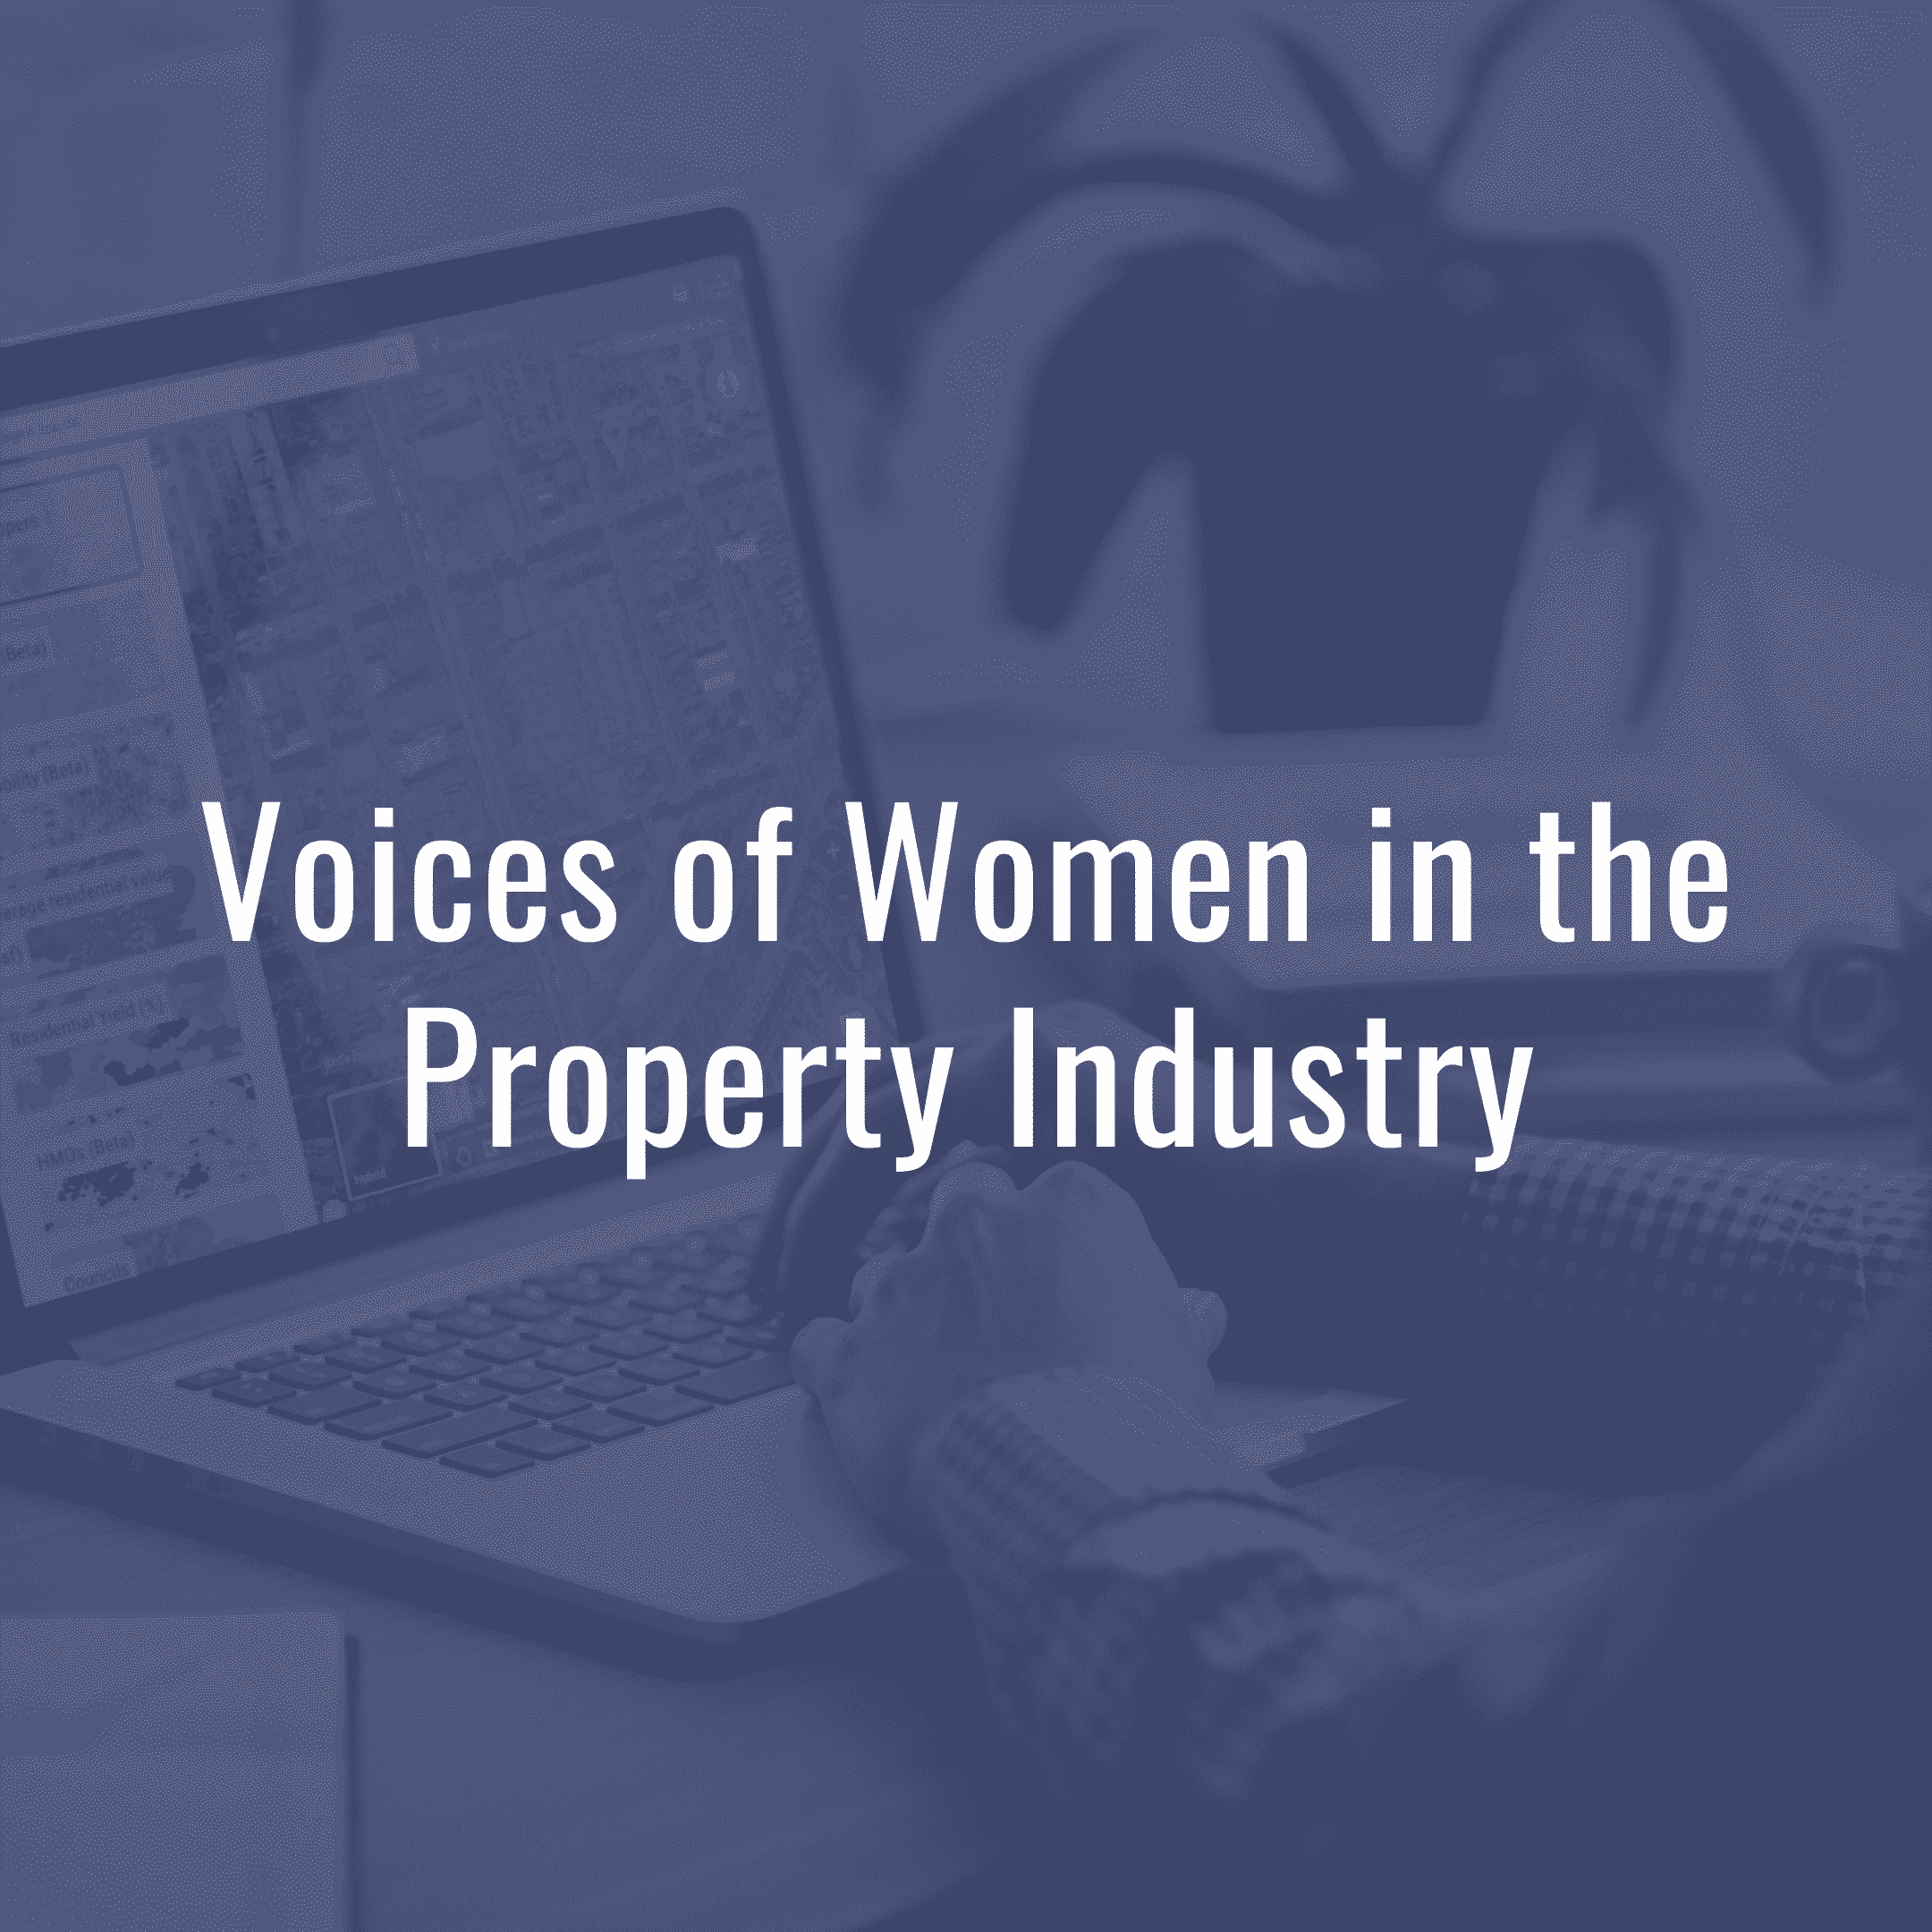 Voices of Women in the property industry